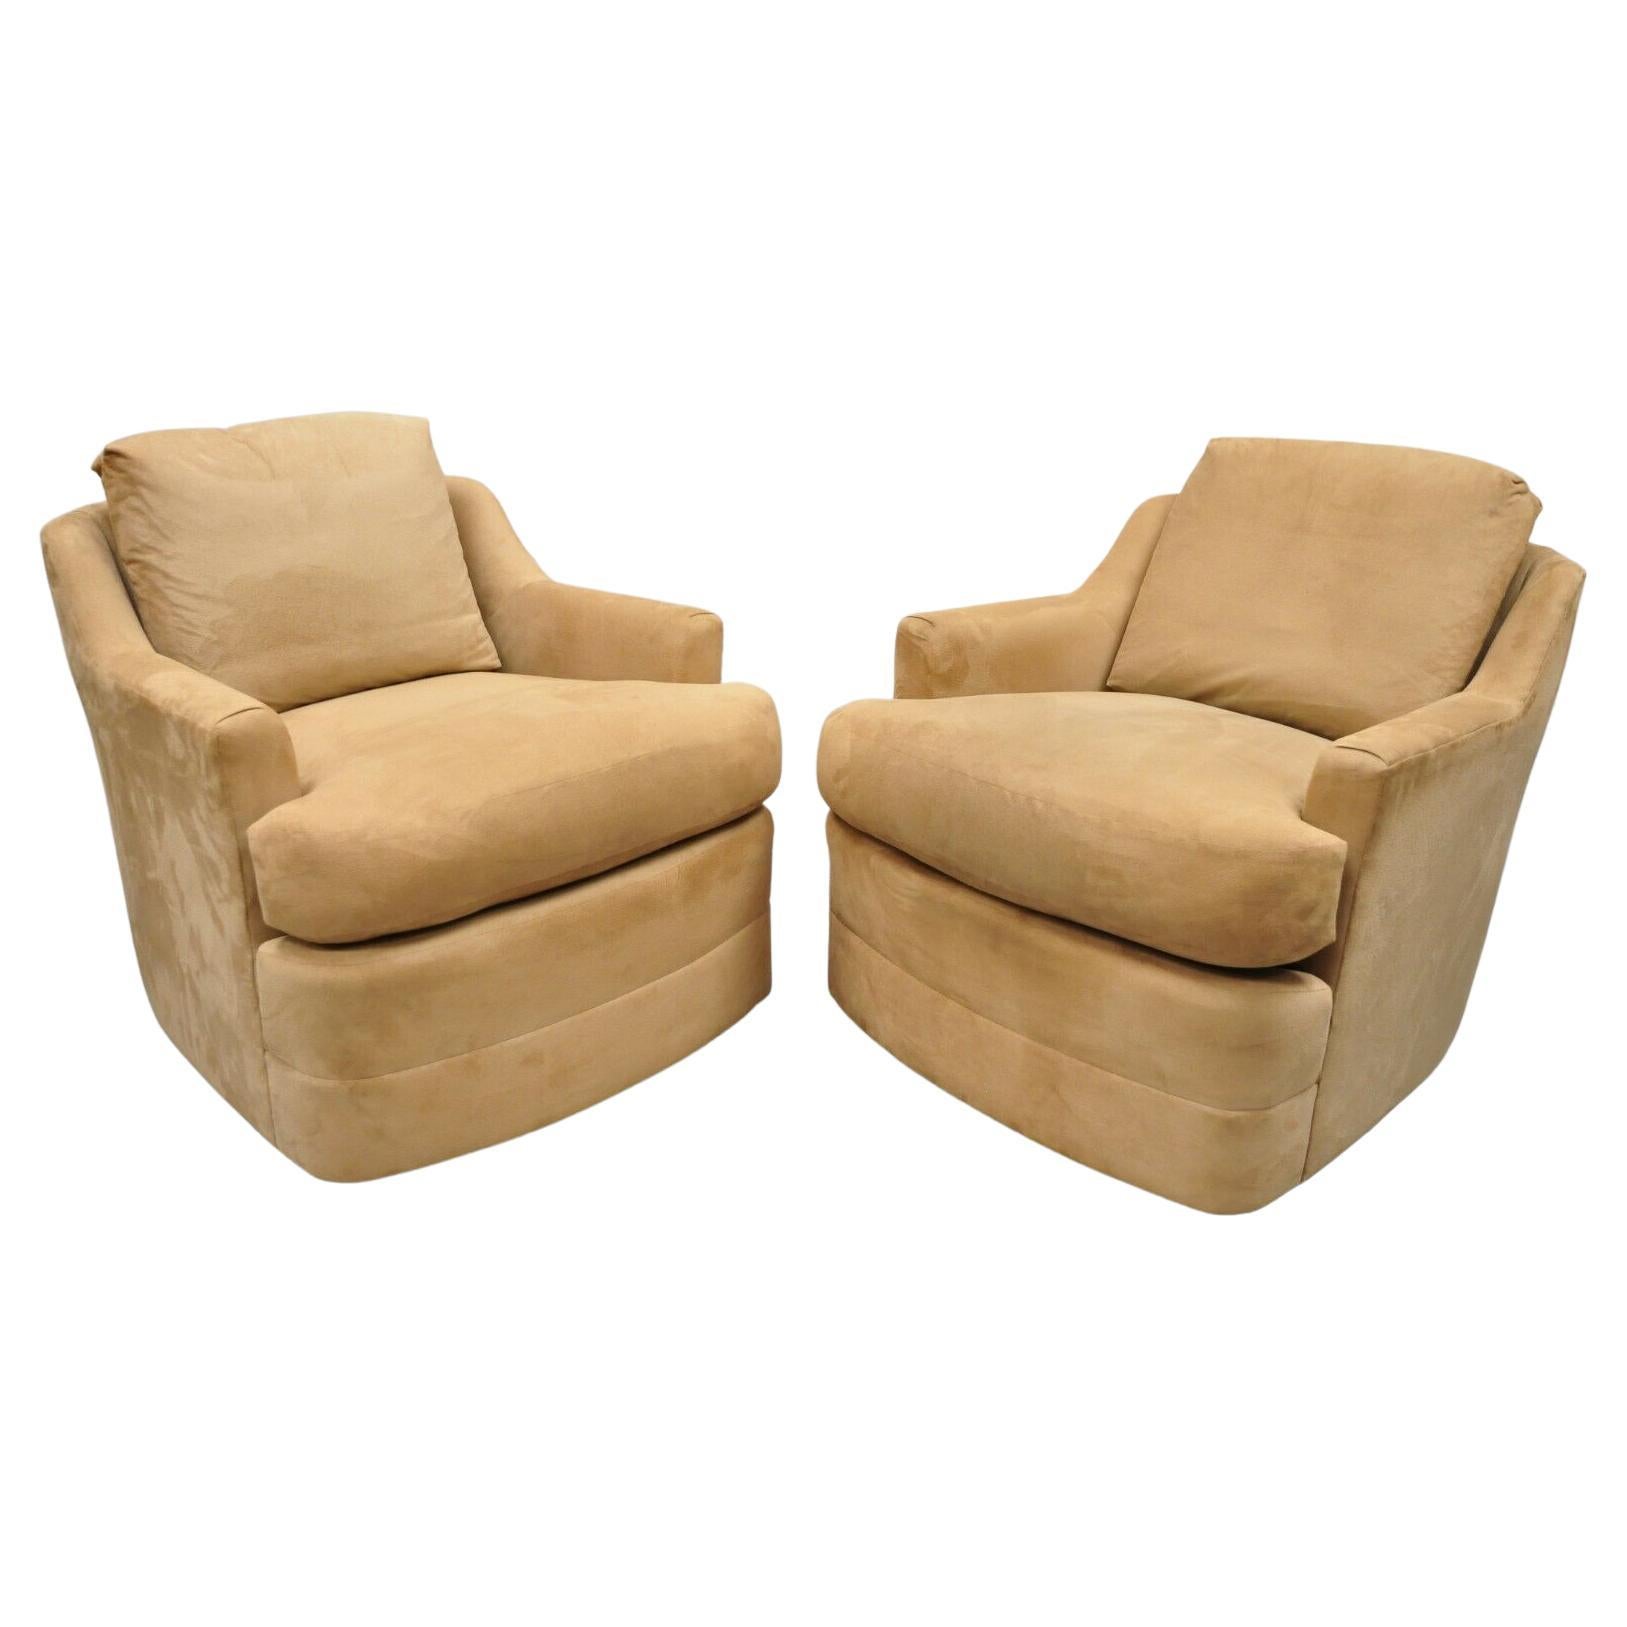 Vintage Mid-Century Modern Swivel Brown Upholstered Lounge Club Chairs, a Pair For Sale